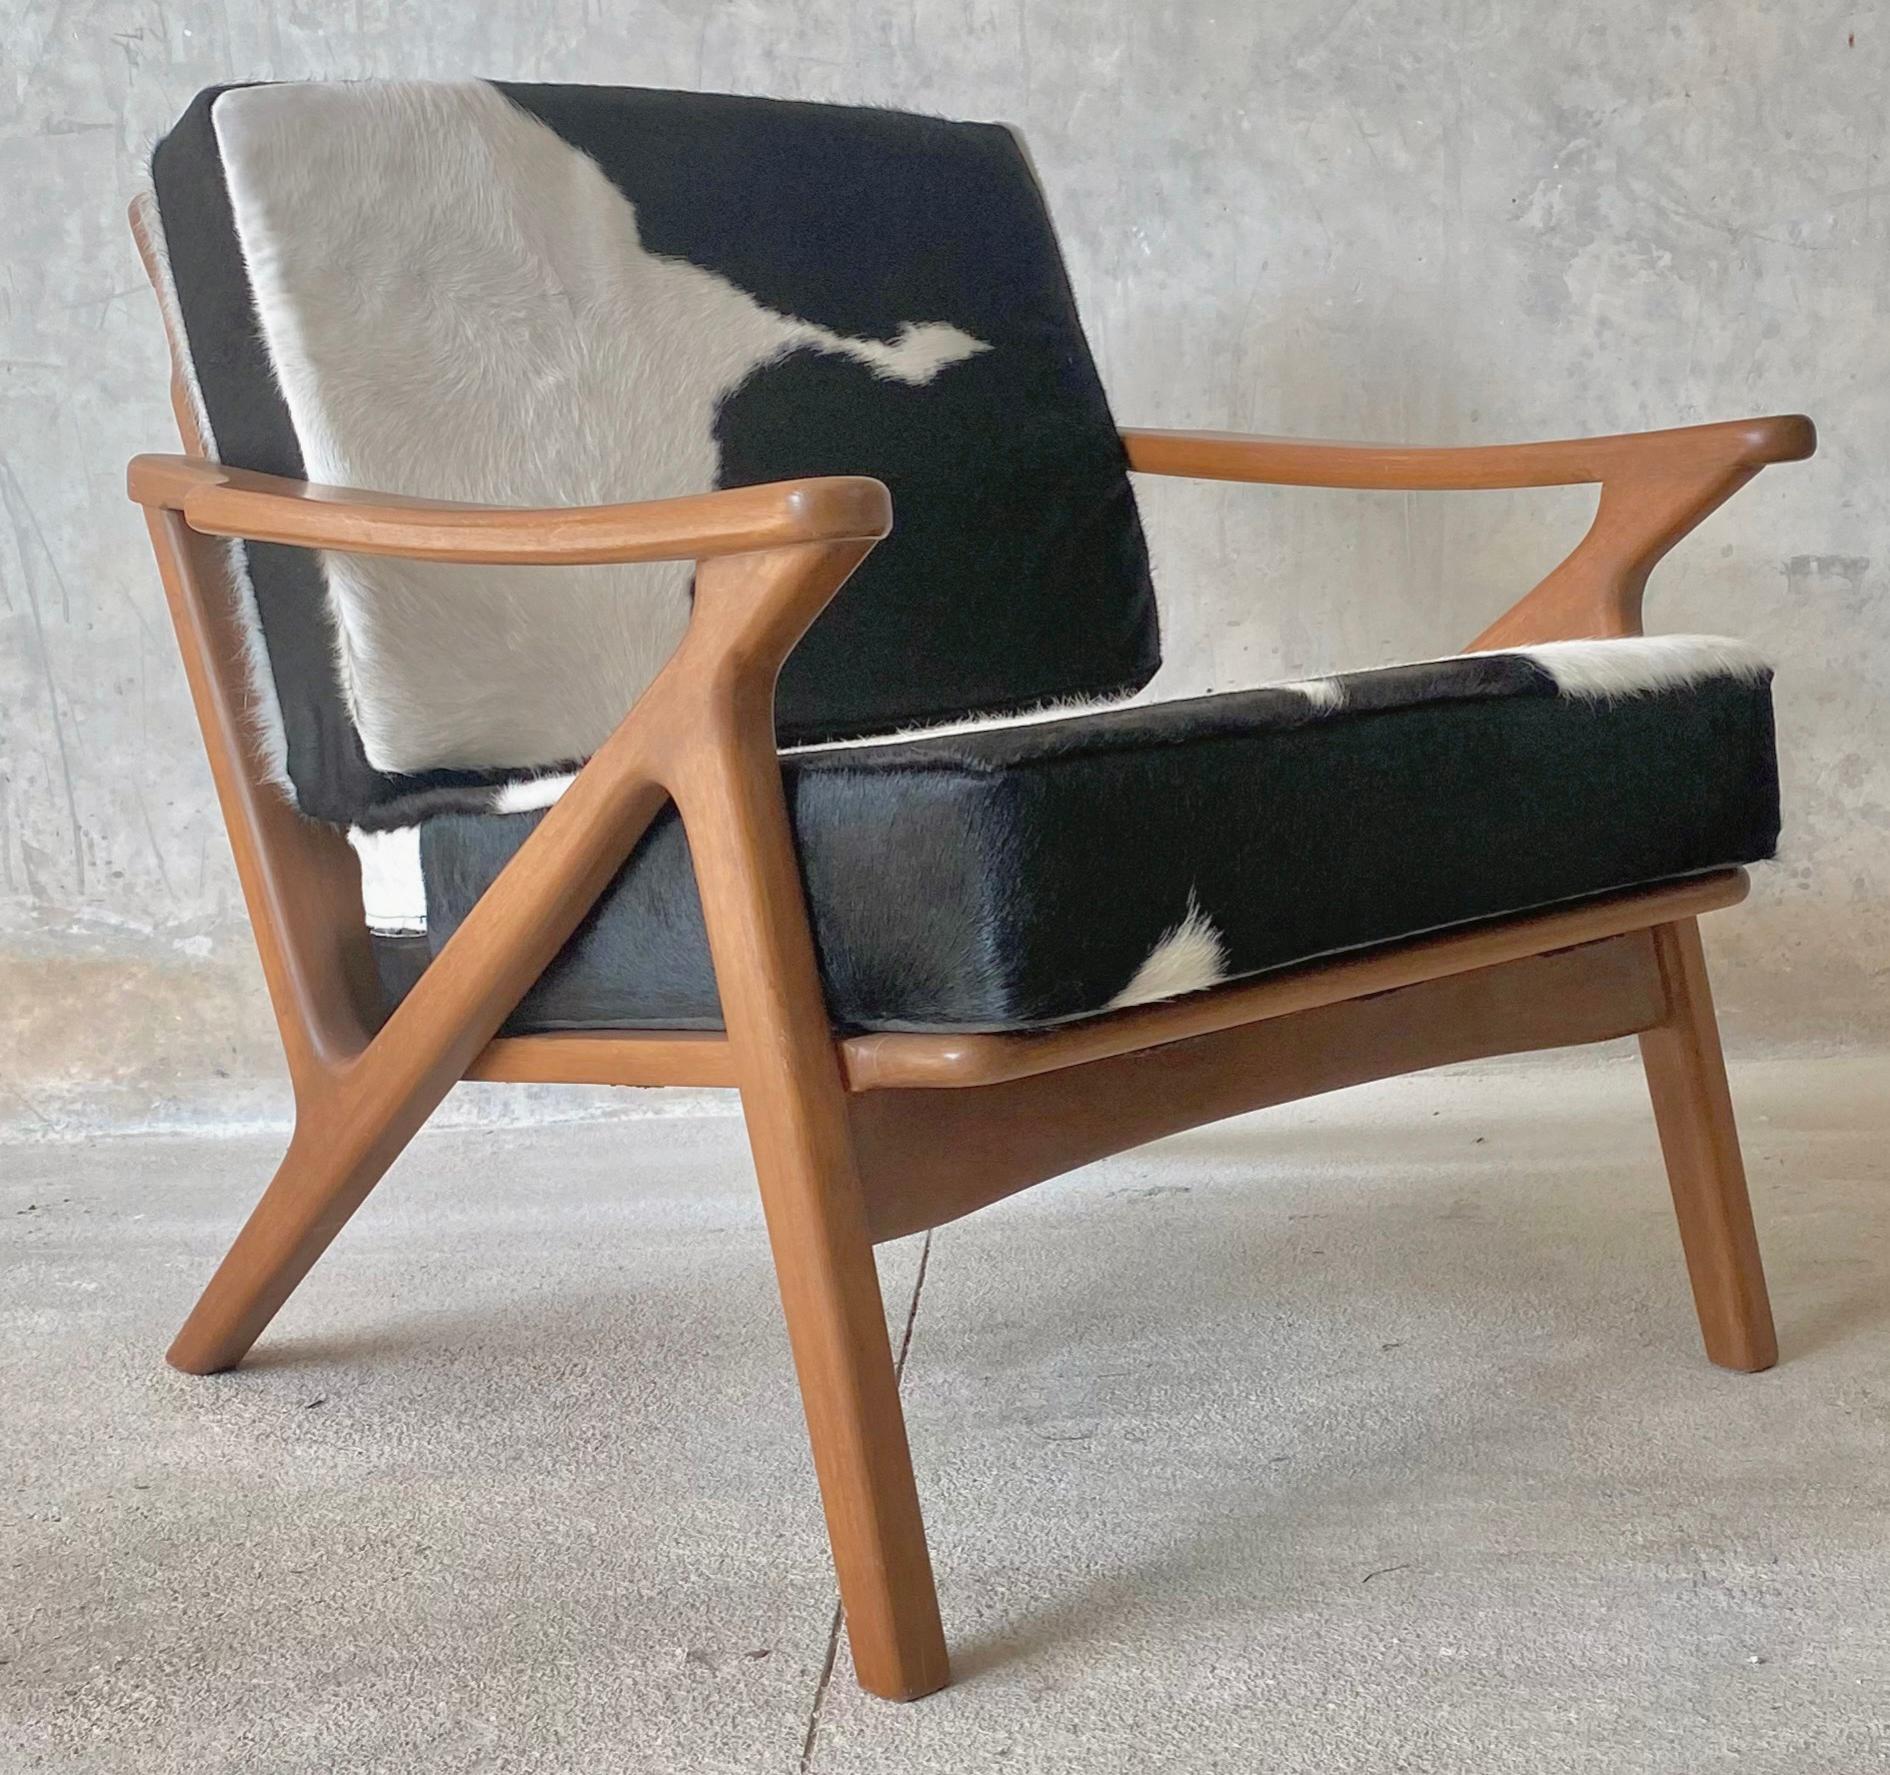 Piece of unknown author, following the lines of Danish furniture, with sober and elegant lines. Cowhide upholstery to increase its decadent luxury.